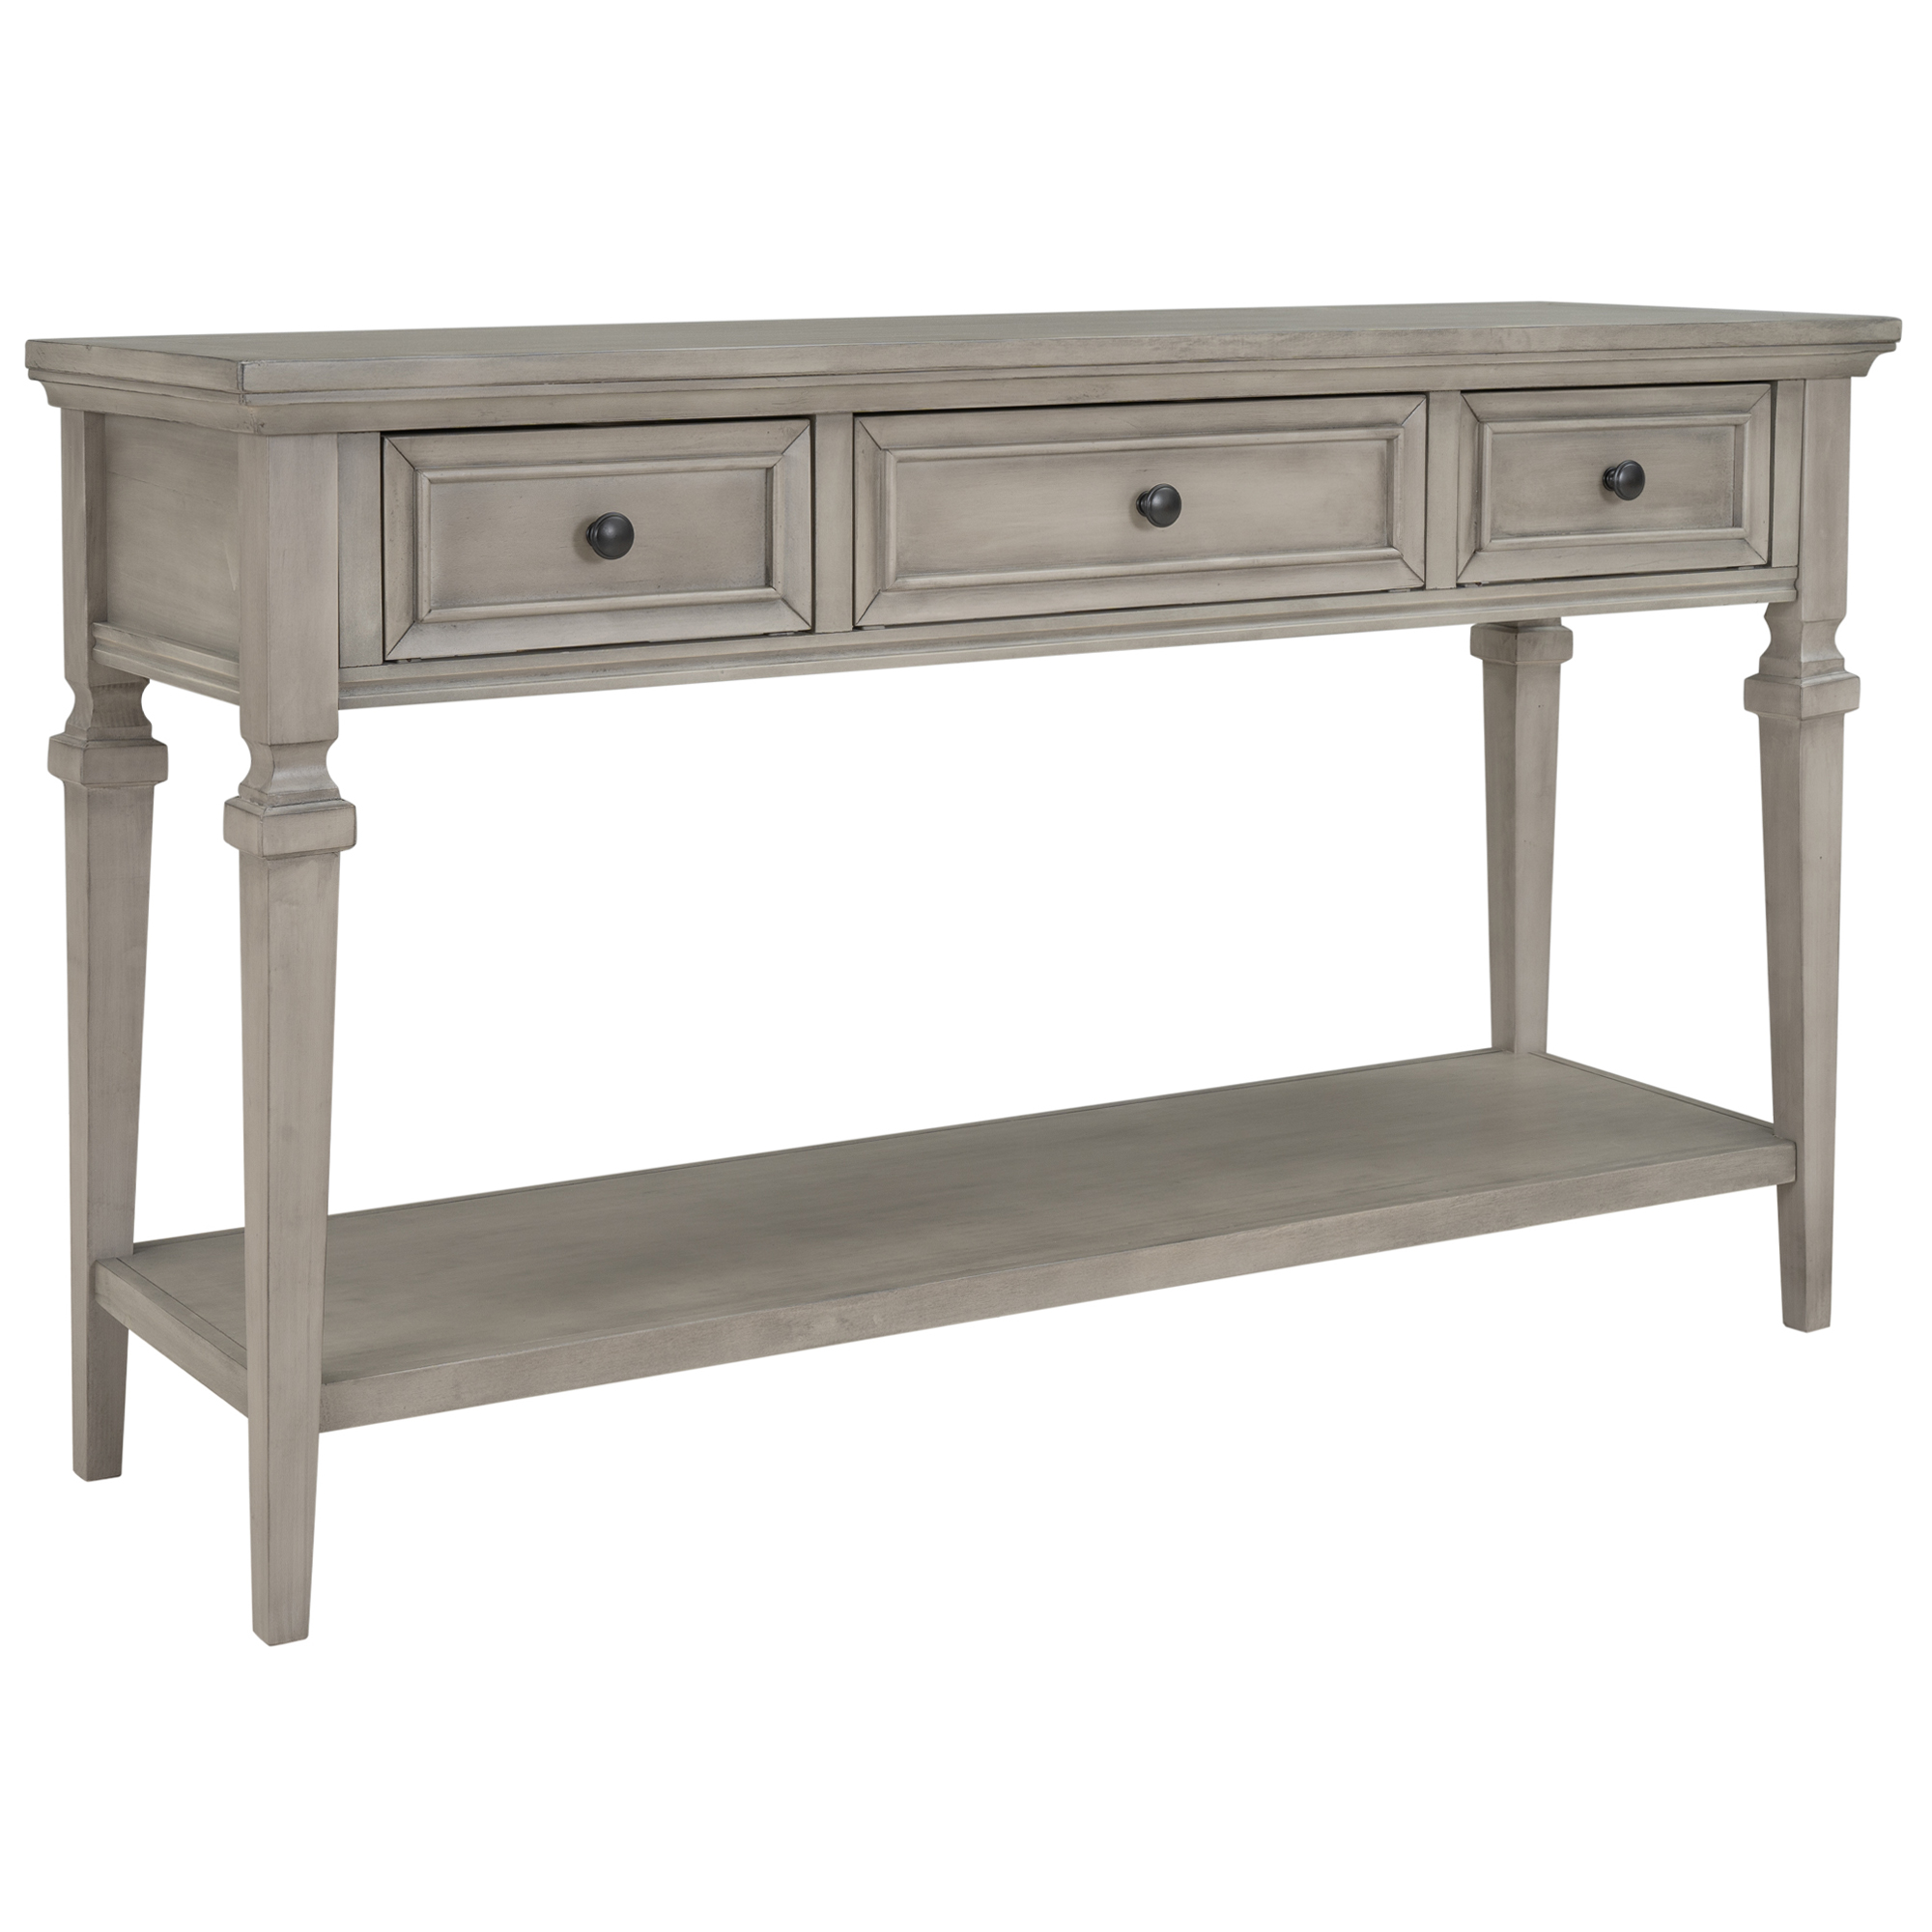 Classic Retro Style Console Table With Three Top Drawers And Bottom Shelf - WF199599AAE